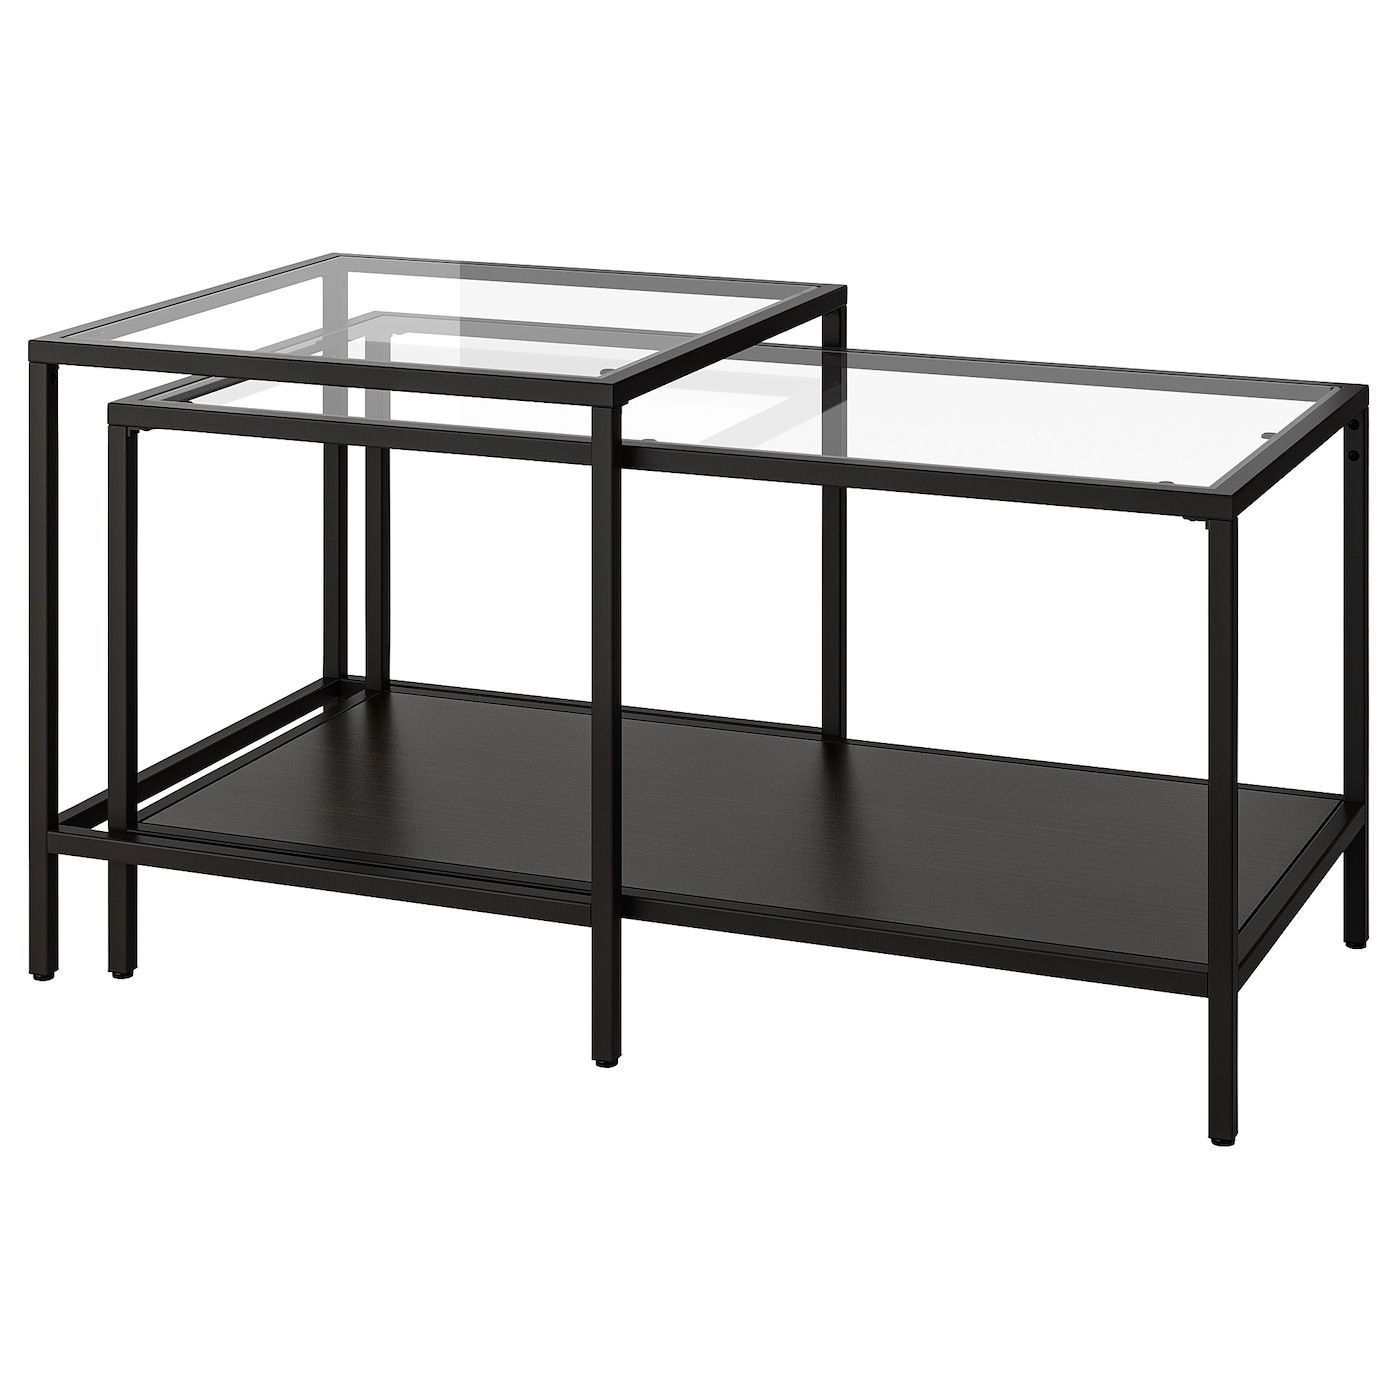 Revamp Your Space with the Modern Ikea Vittsjo Table